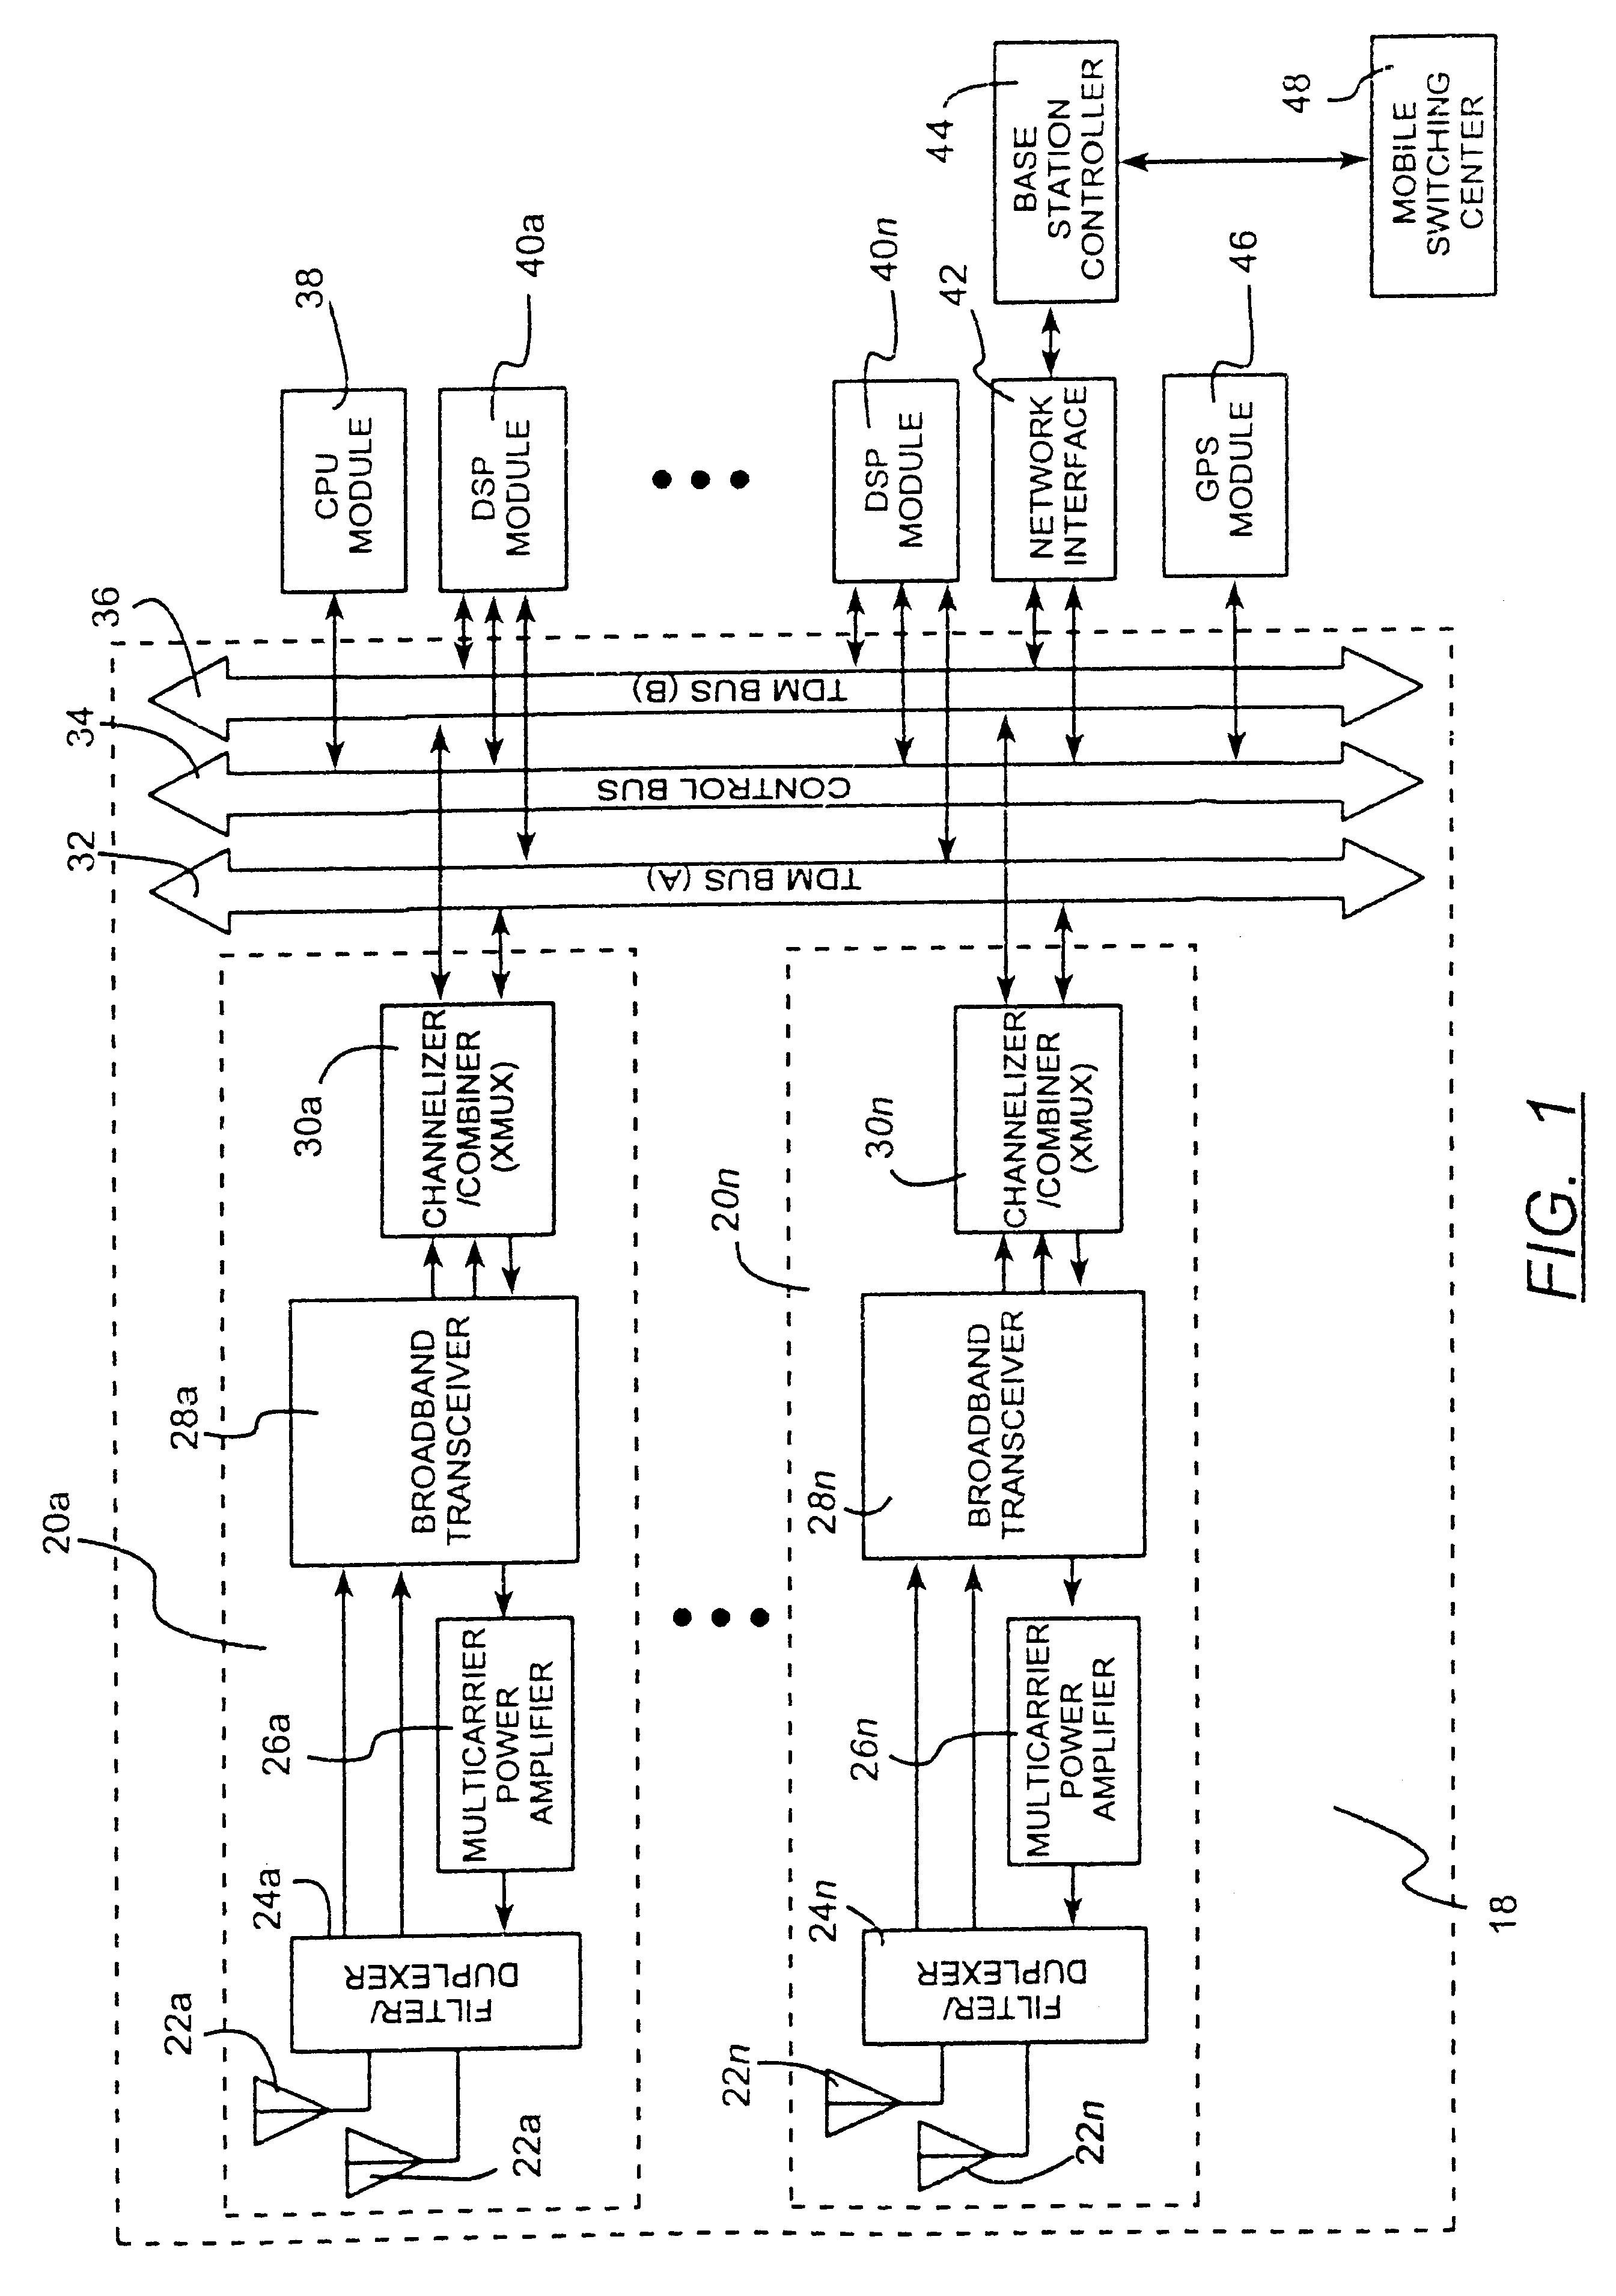 Dynamic allocation of carrier frequencies in a wireless broadband base station